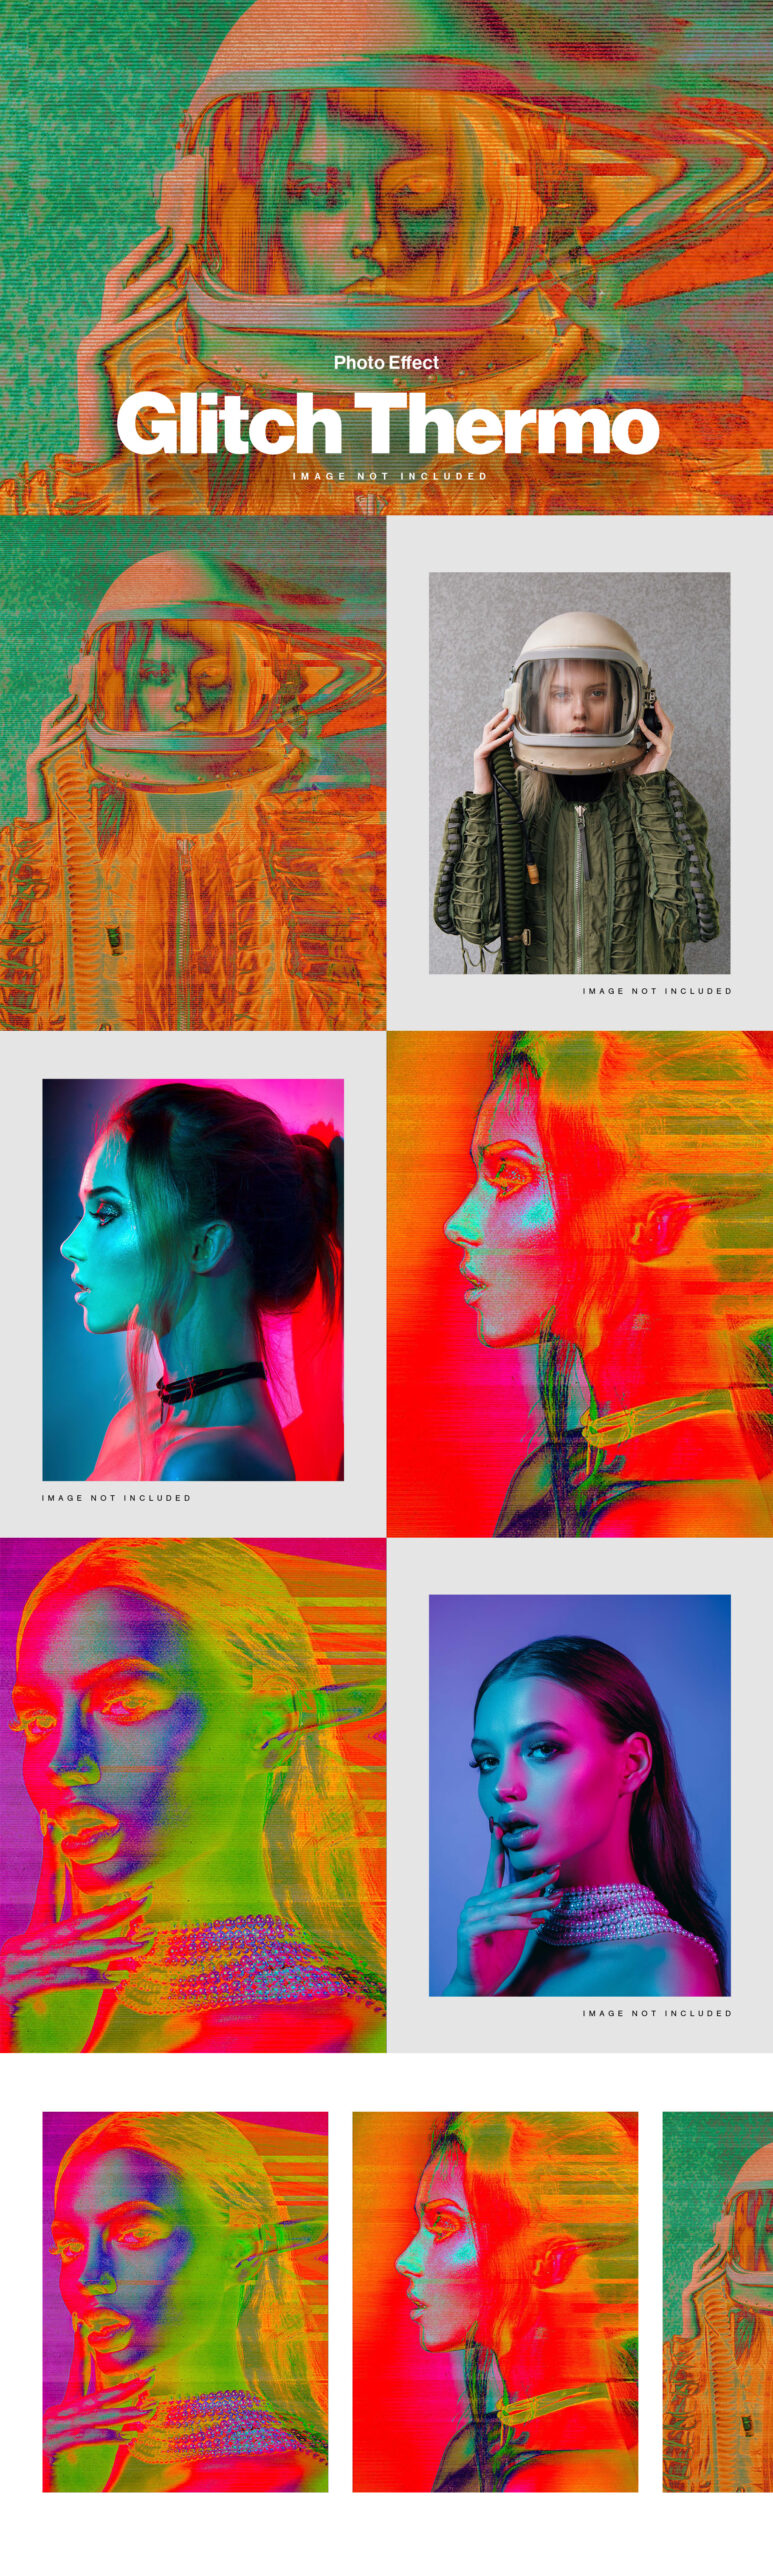 Glitch Thermo Photo Effect in PSD format